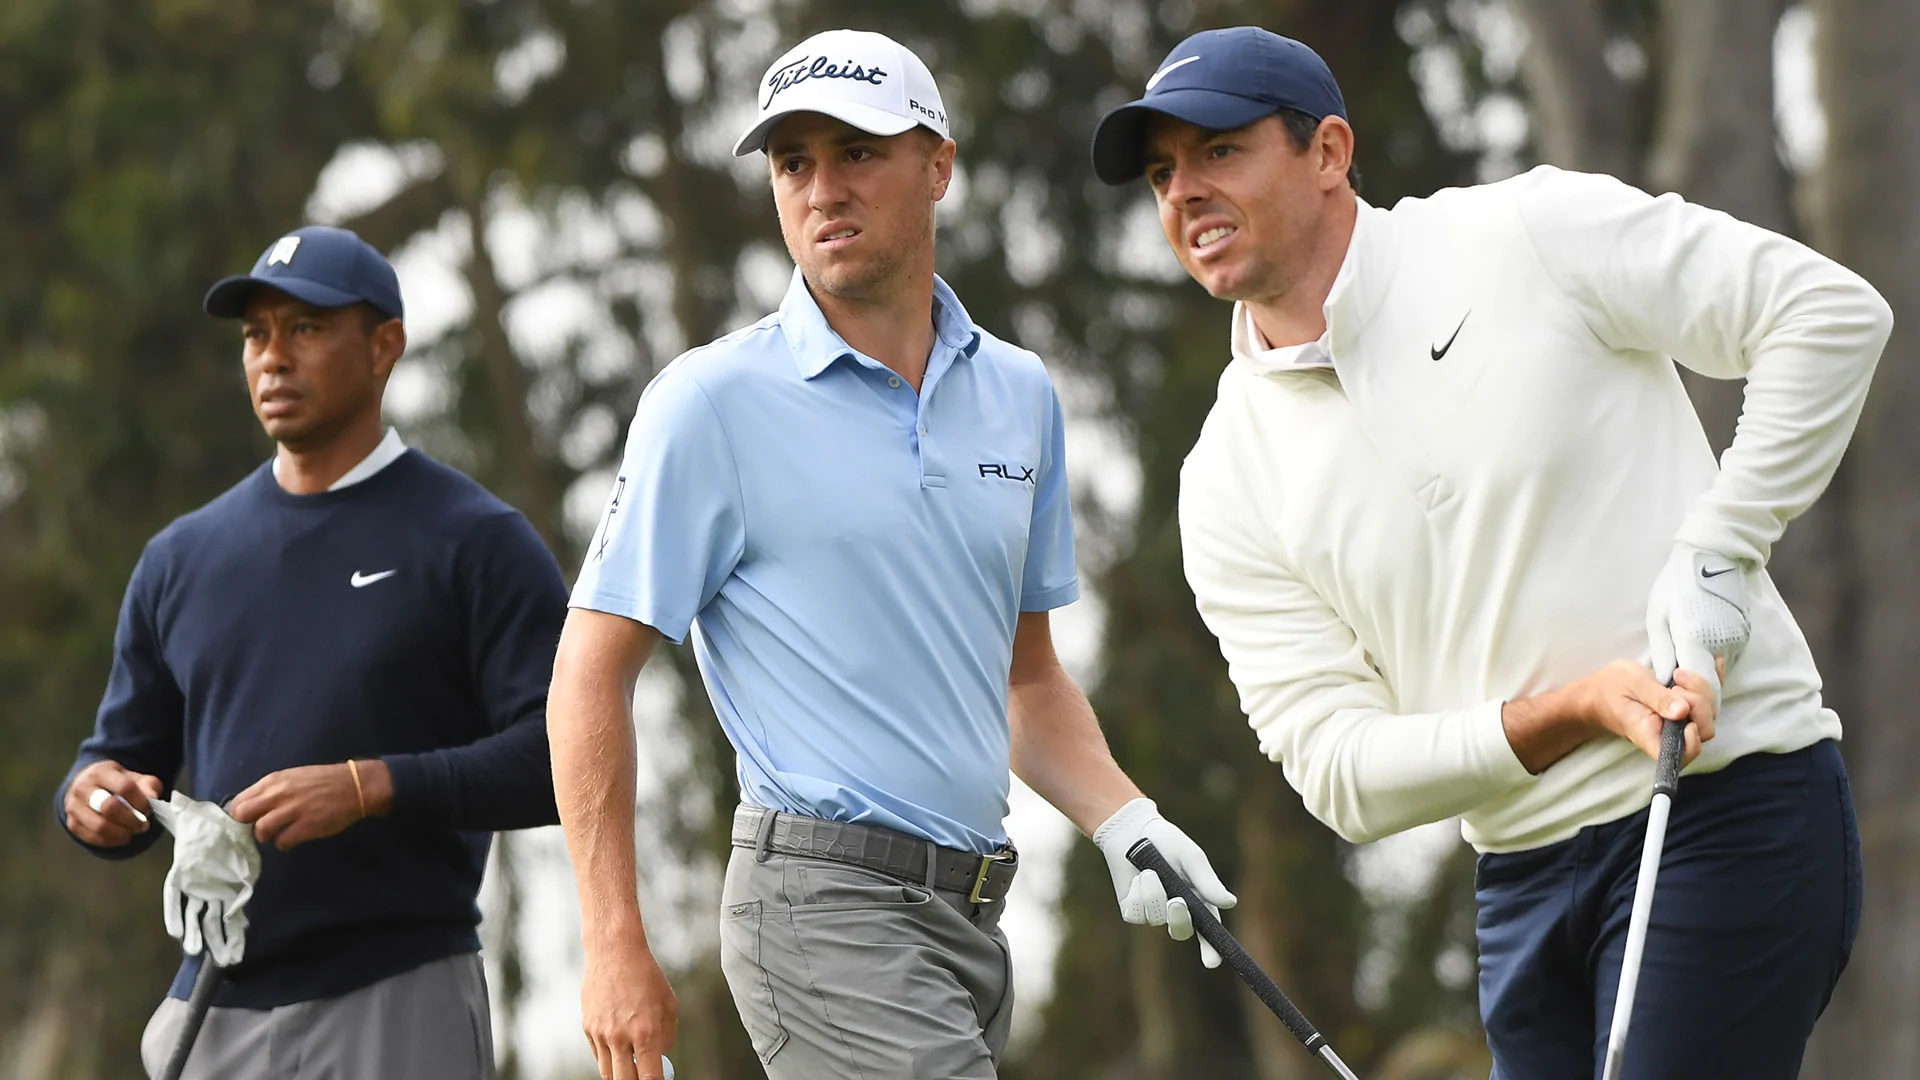 Tiger Woods, Justin Thomas, Rory McIlroy, Justin Rose in Payne’s Valley Cup